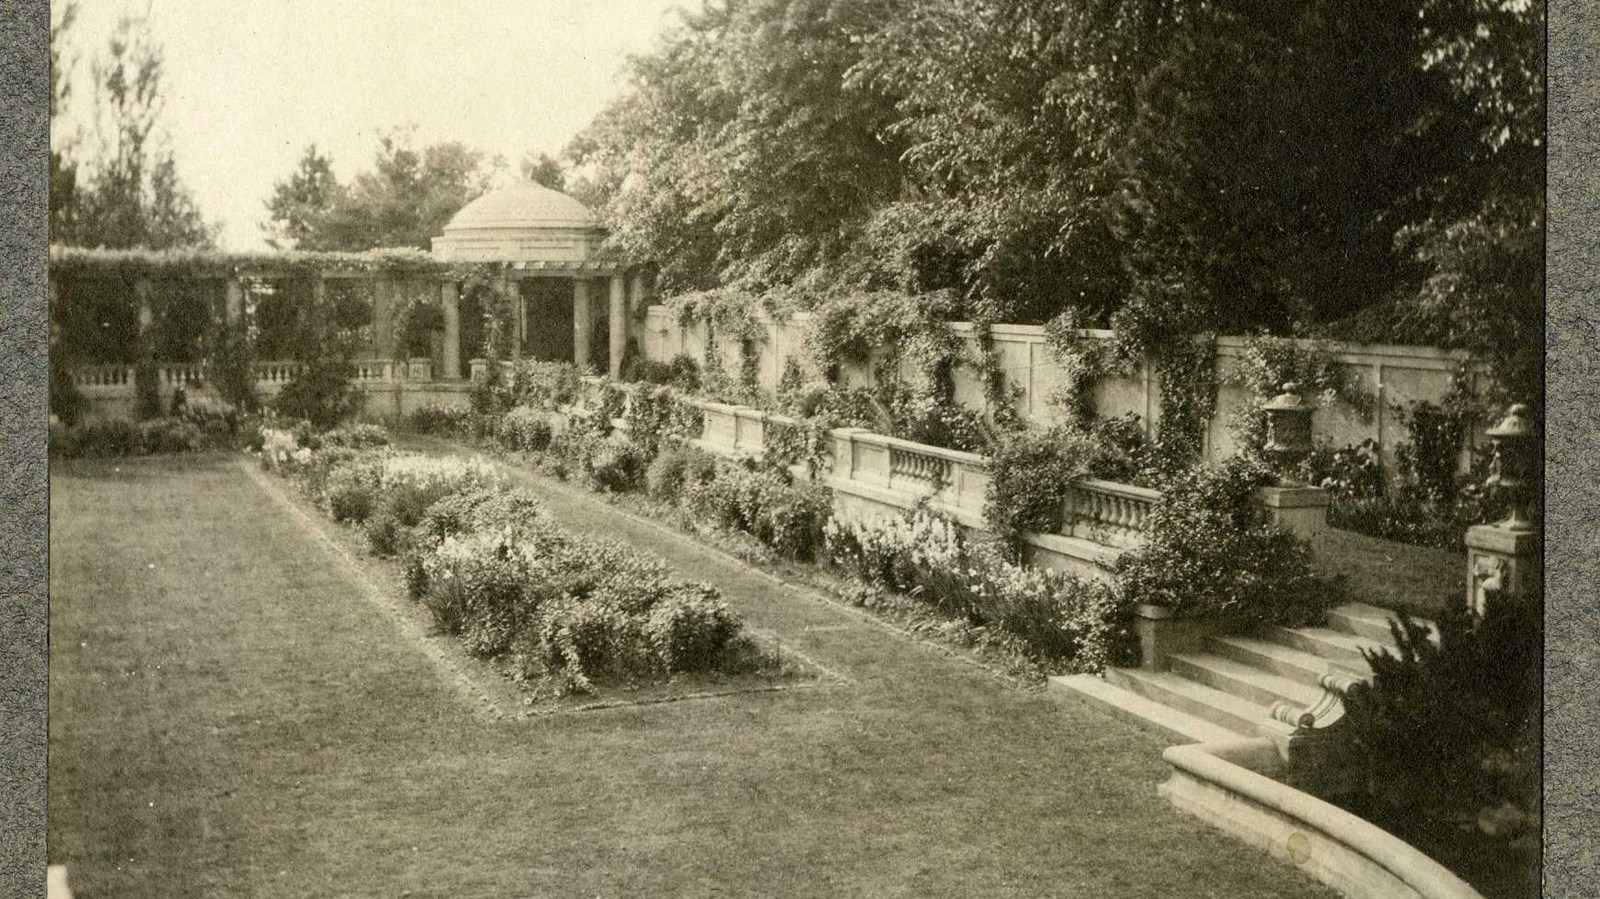 Black and white of garden with grassy area, shrub rectangular area, and elevated section with plants